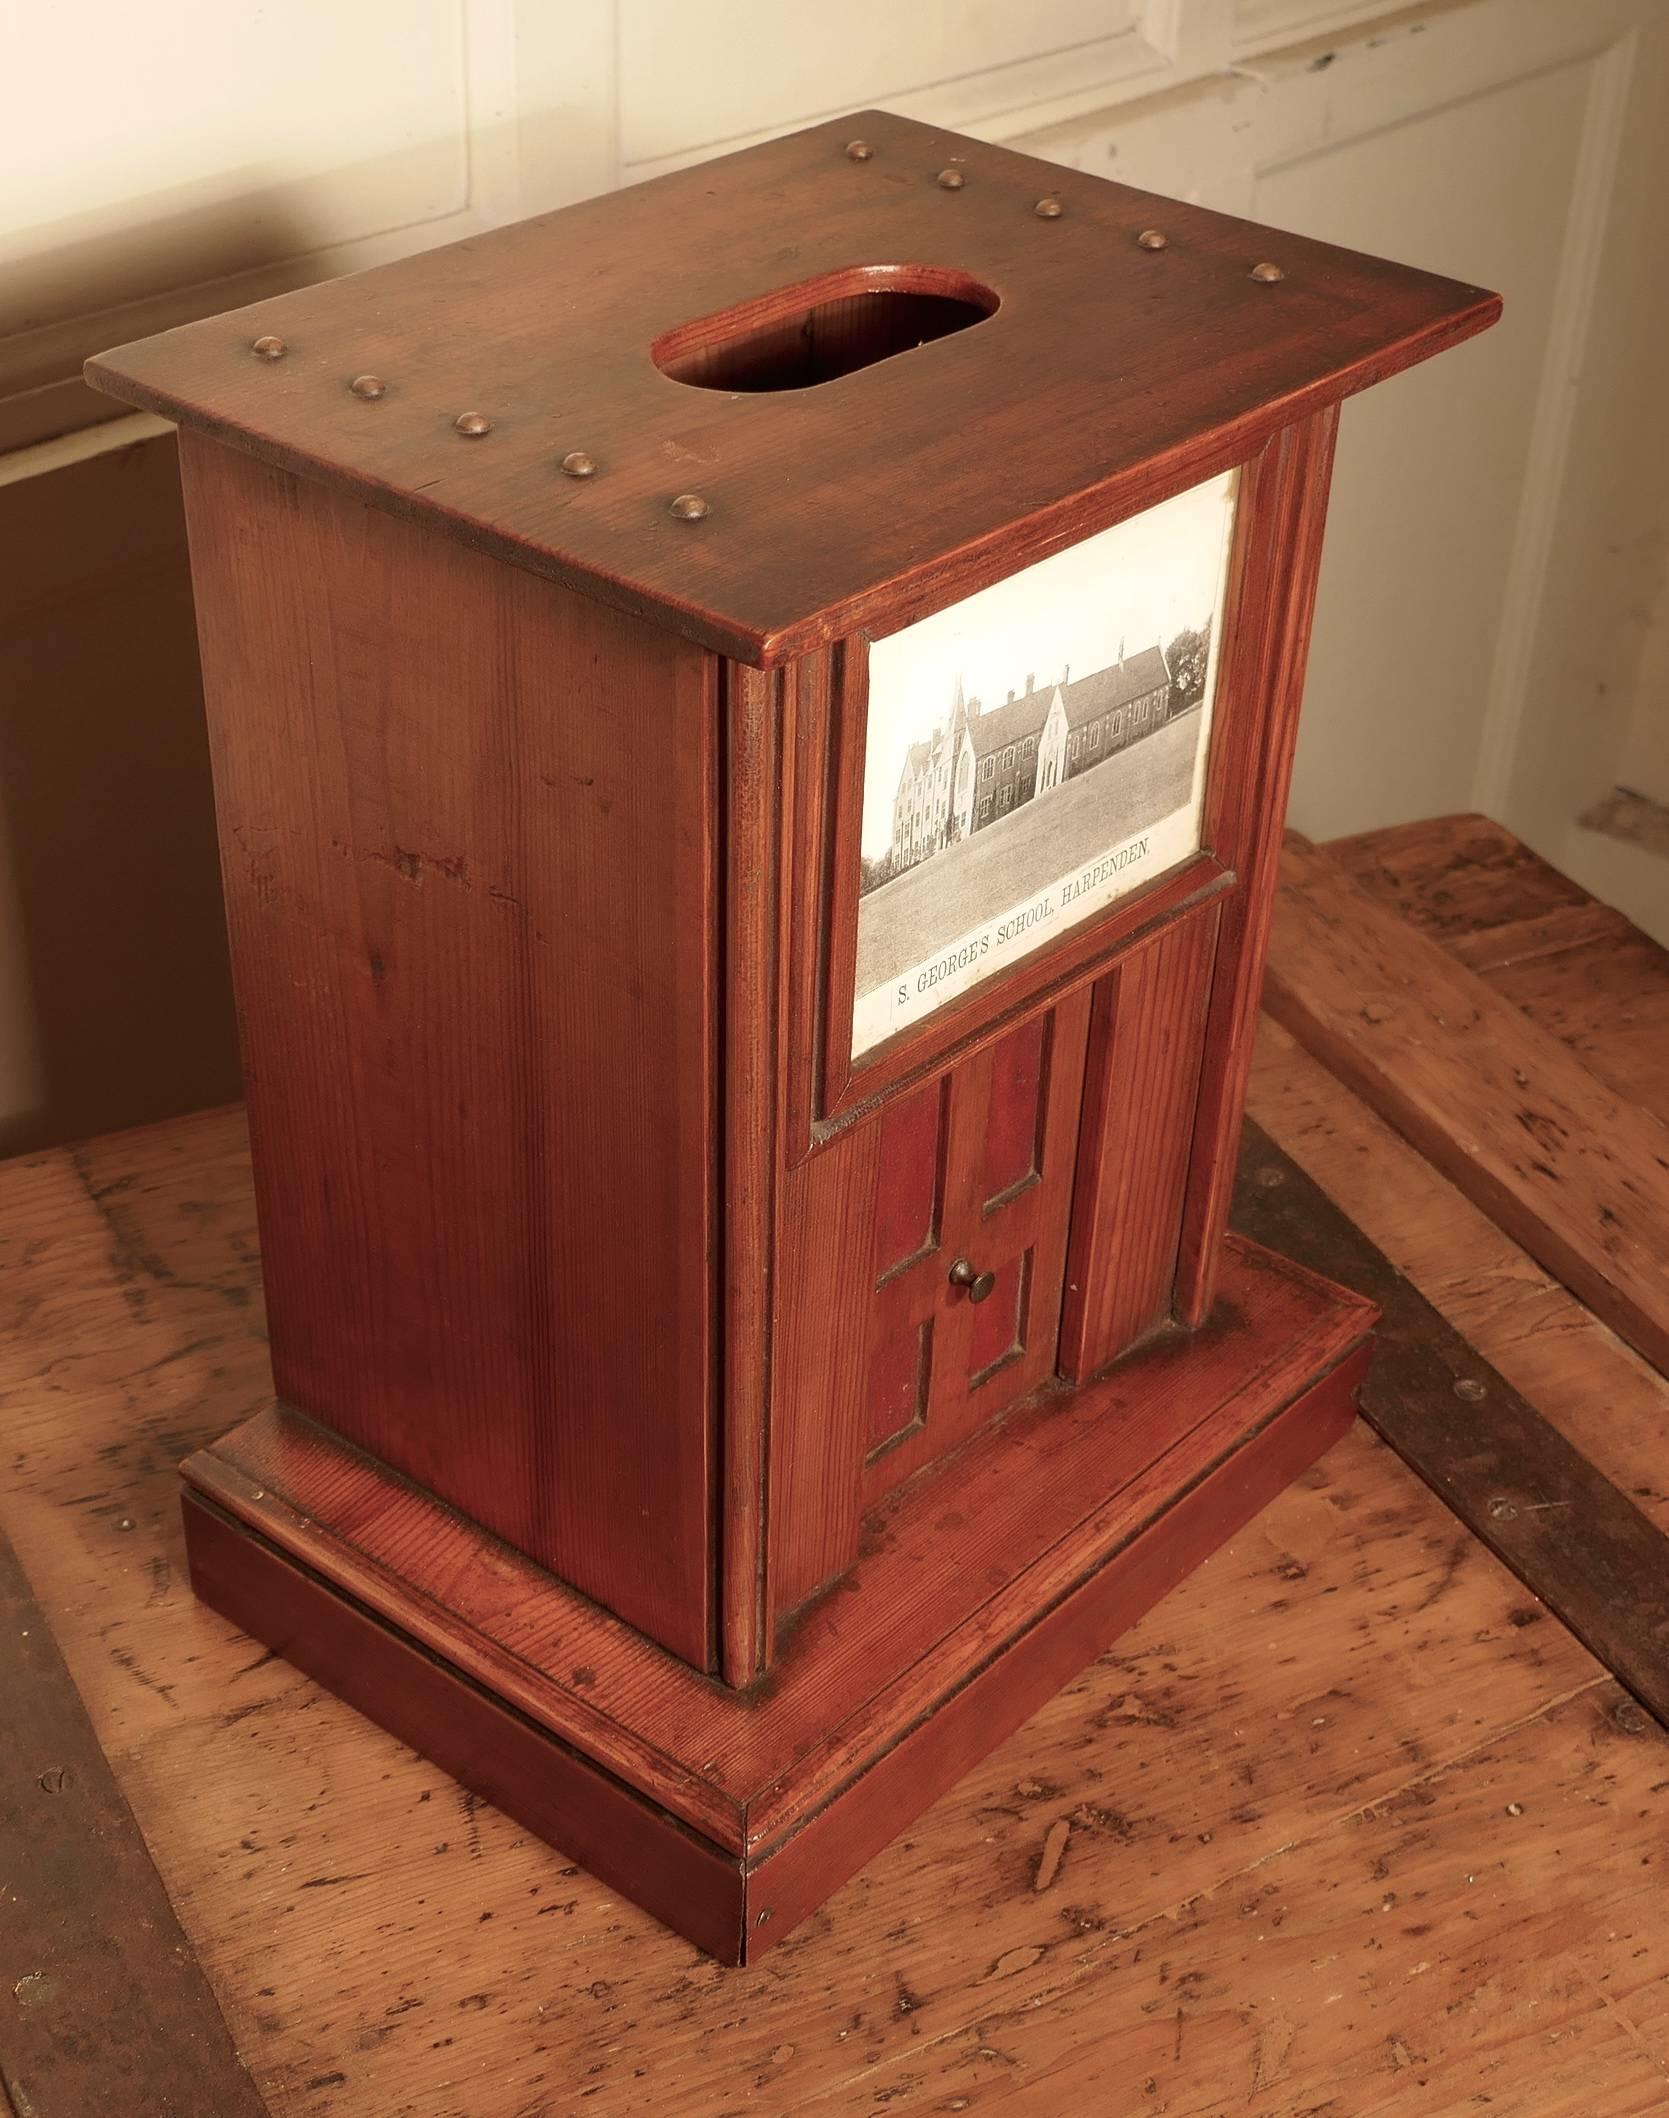 Victorian school house letter box, post box.

The post box is a very attractive piece, it has a slot in the top for letters and a picture of St Georges School Harpenden on the front above a pretty little four-panel door which has red leather in